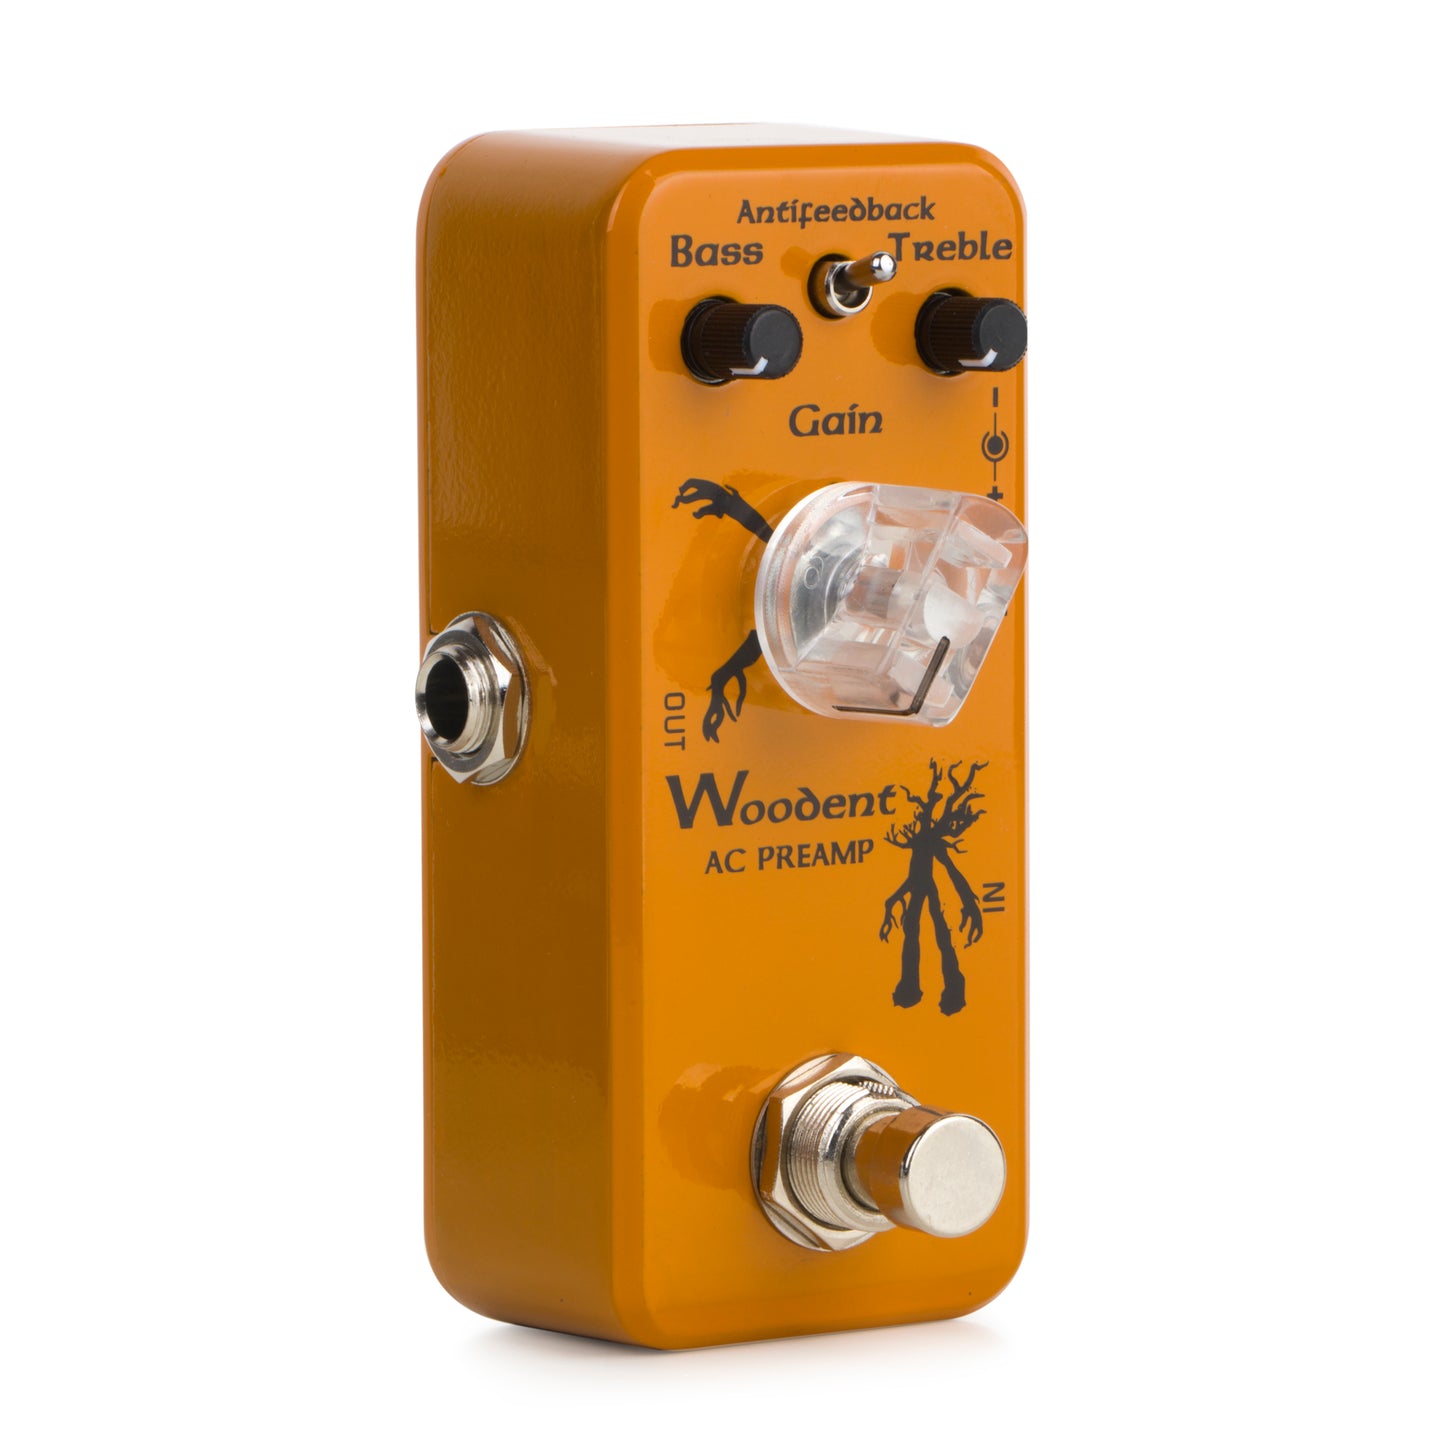 Movall MP-318 Woodent AC Preamp Mini Acoustic Preamp Pedal